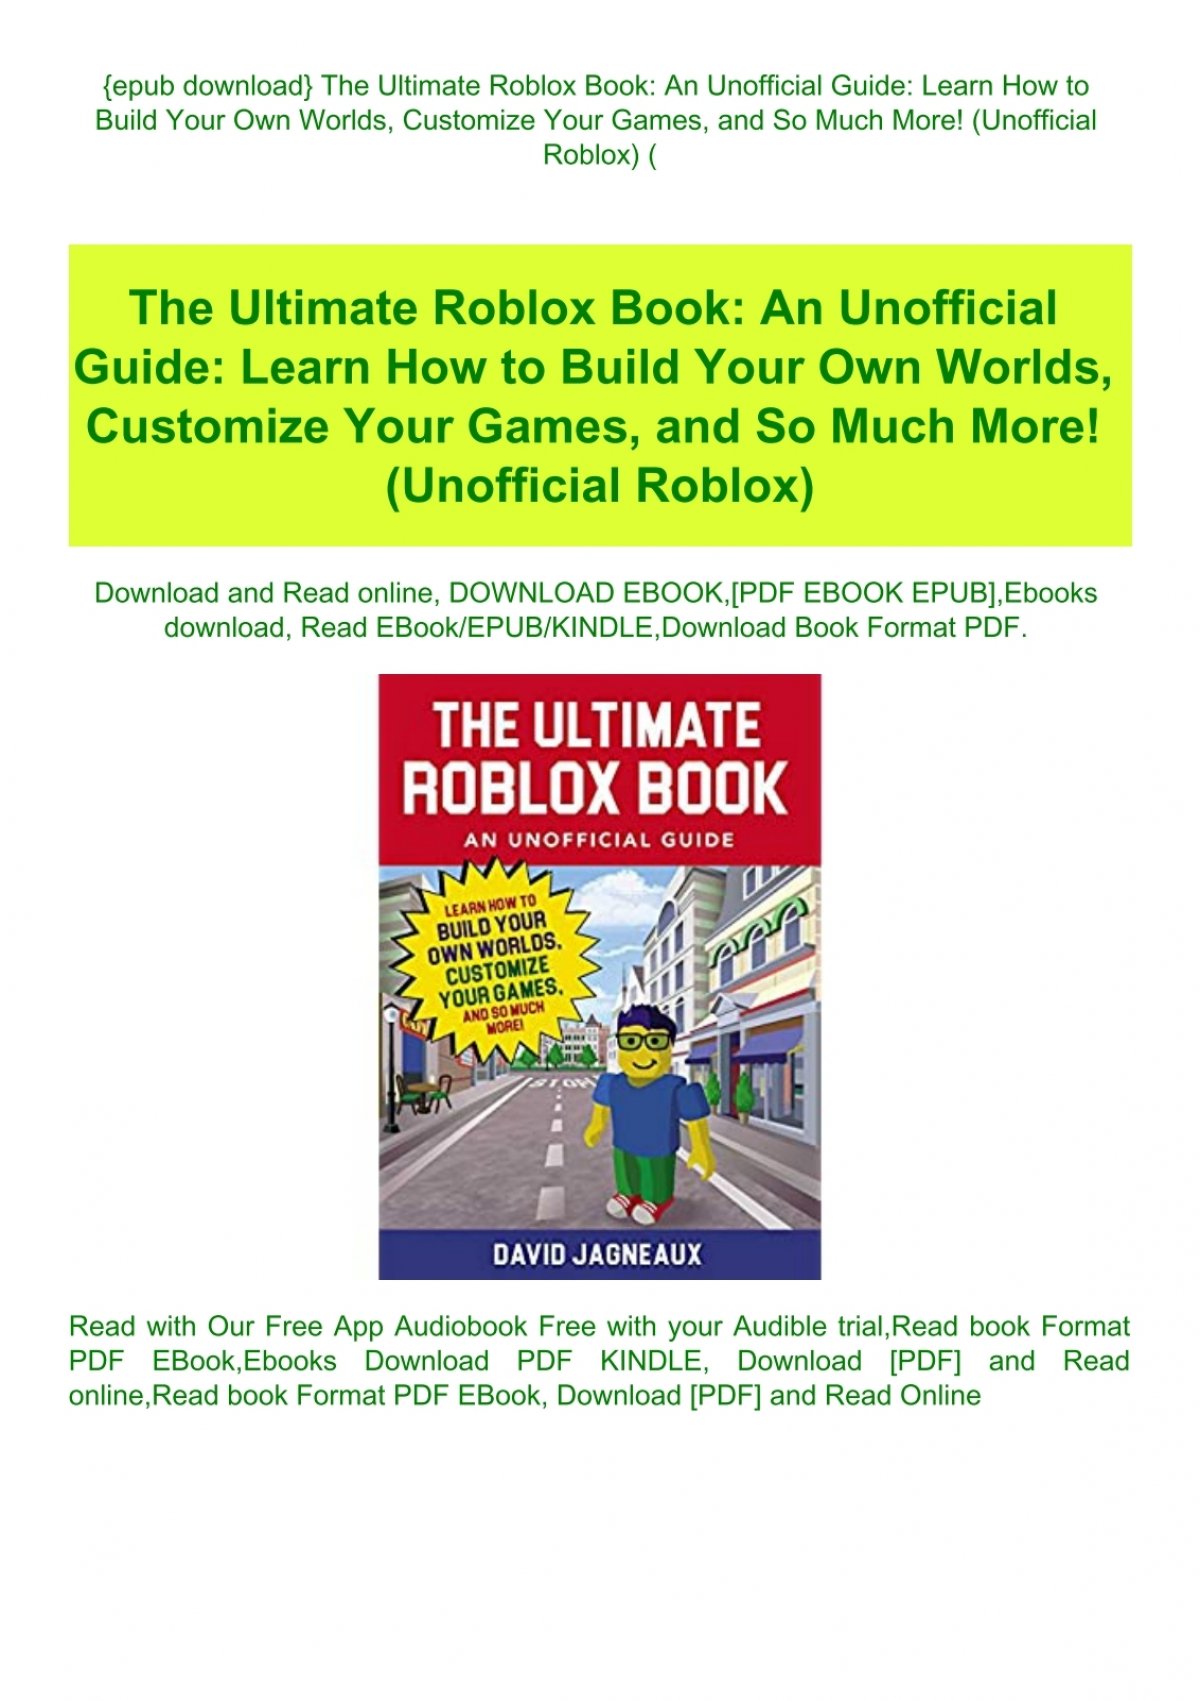 How To Download Roblox On Kindle Tix Robux On Roblox